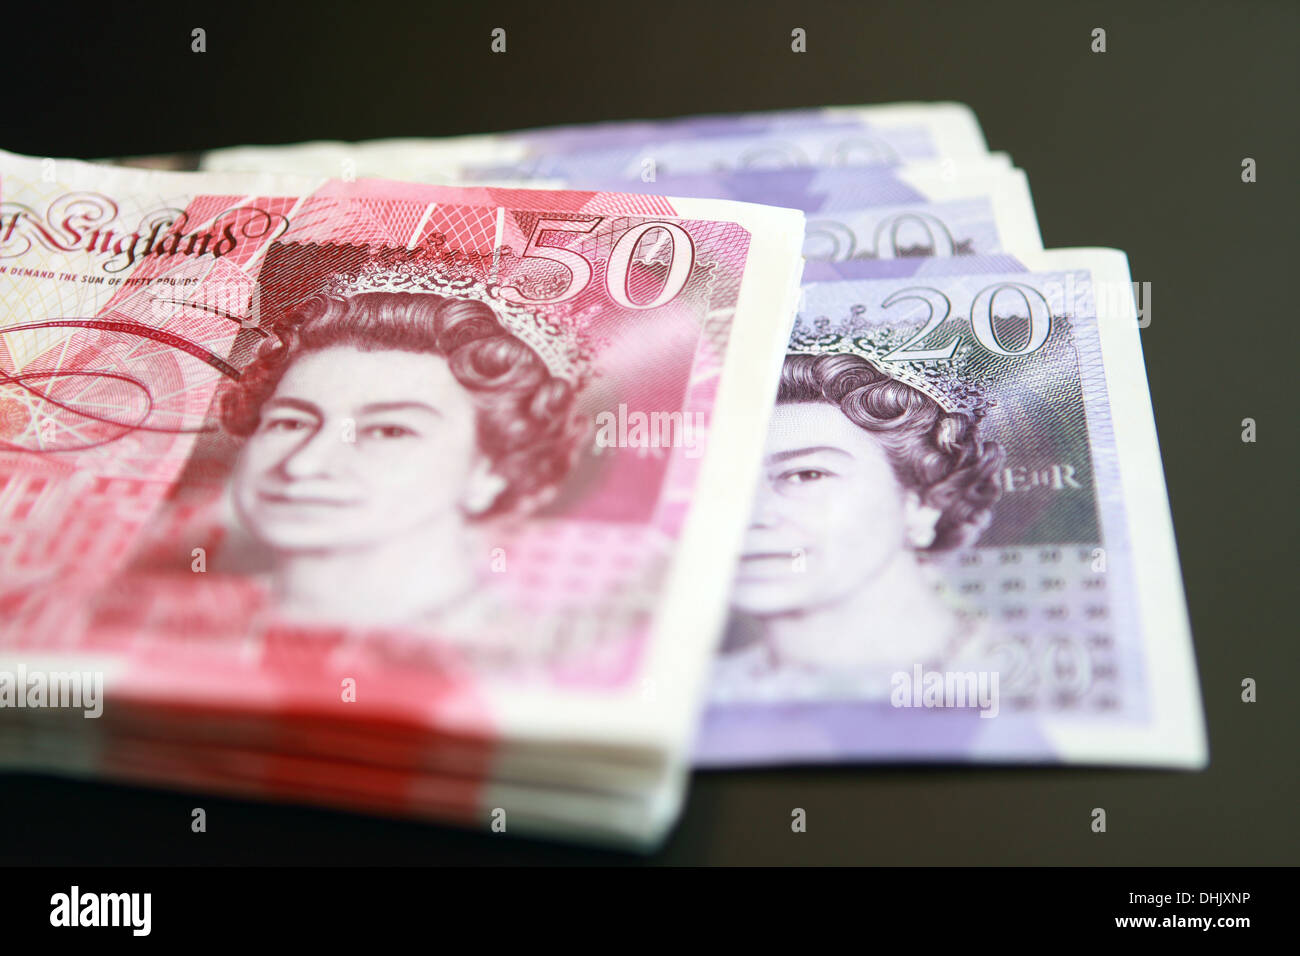 Sterling £50 and £20 notes. Stock Photo